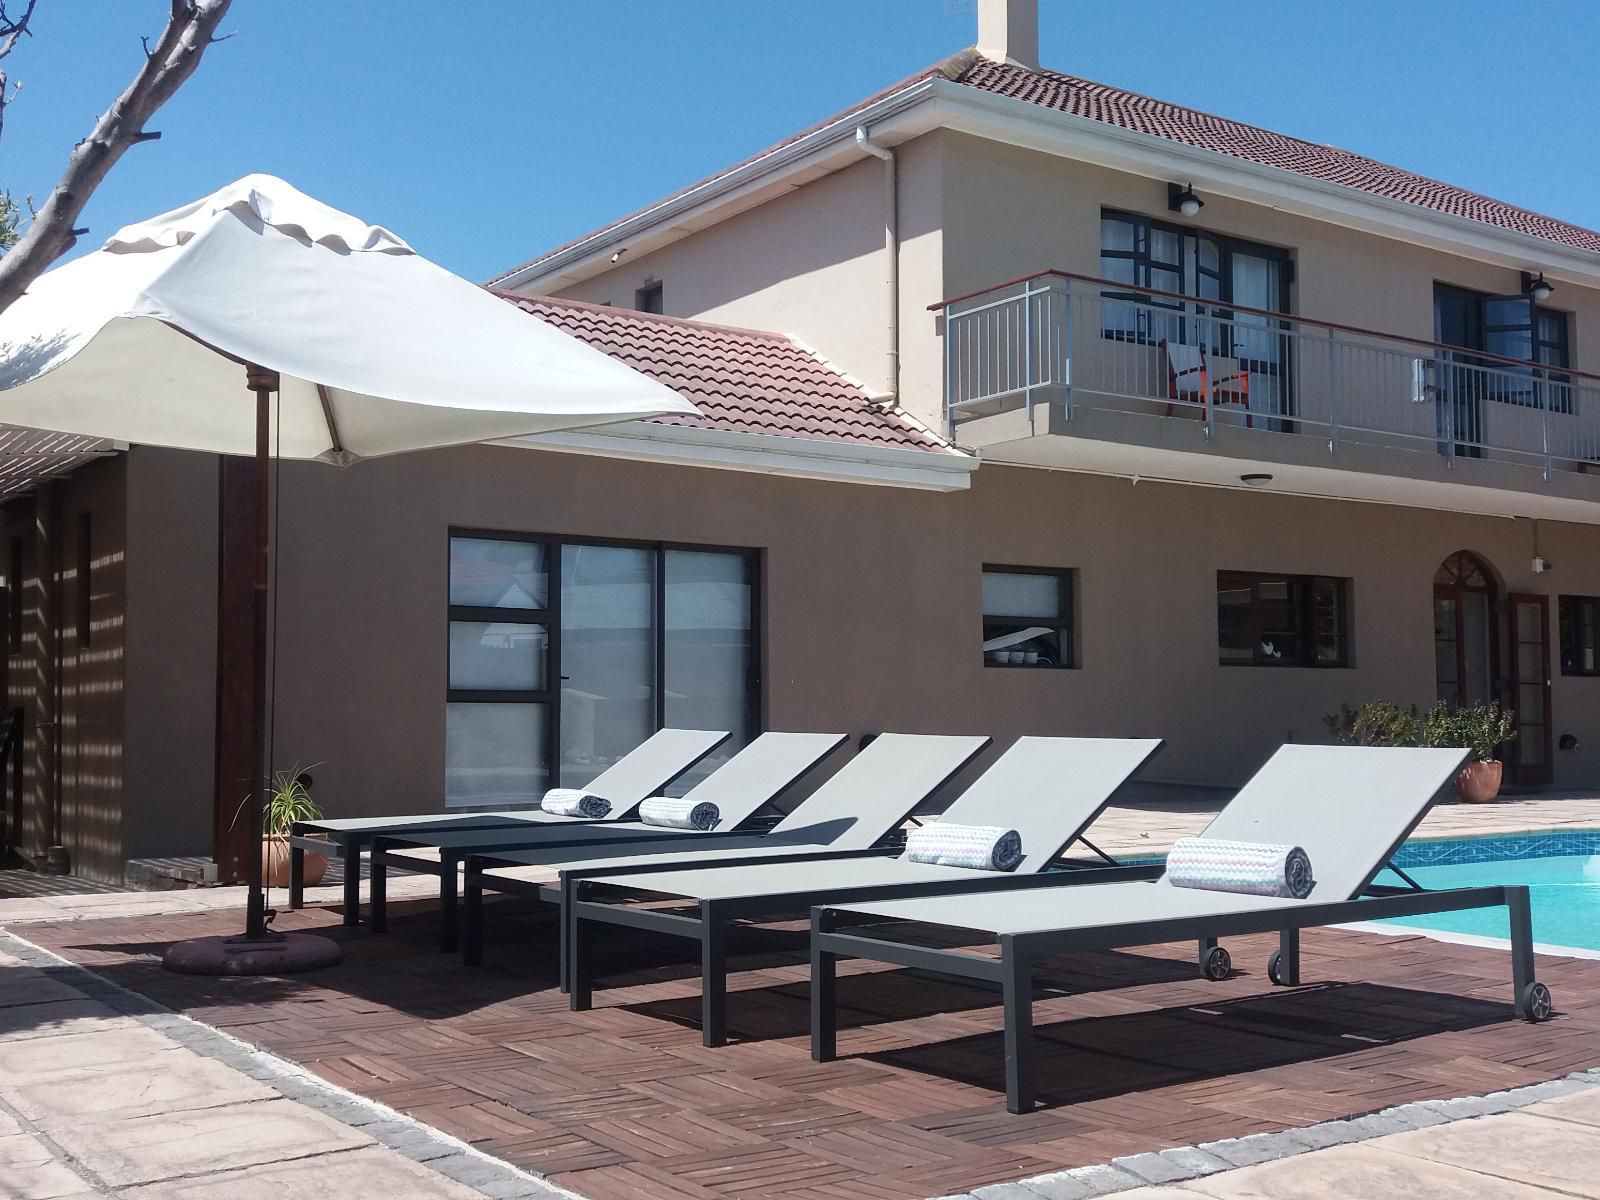 La Roche Guest House Milnerton Cape Town Western Cape South Africa House, Building, Architecture, Swimming Pool